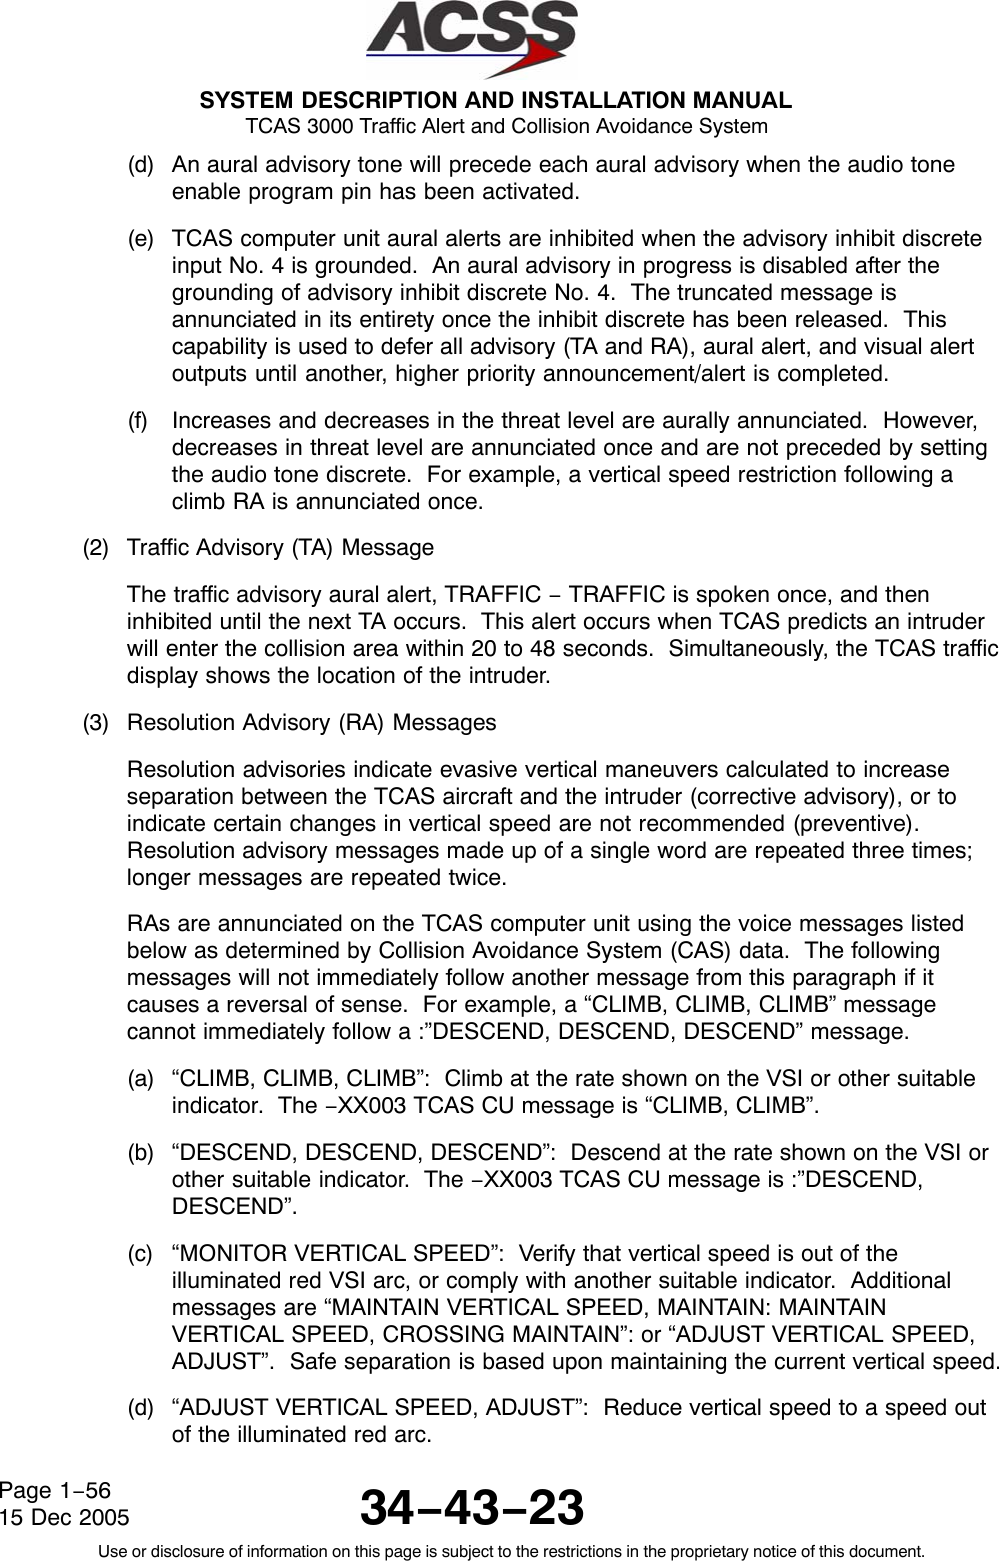  SYSTEM DESCRIPTION AND INSTALLATION MANUAL TCAS 3000 Traffic Alert and Collision Avoidance System34−43−23Use or disclosure of information on this page is subject to the restrictions in the proprietary notice of this document.Page 1−5615 Dec 2005(d) An aural advisory tone will precede each aural advisory when the audio toneenable program pin has been activated.(e) TCAS computer unit aural alerts are inhibited when the advisory inhibit discreteinput No. 4 is grounded.  An aural advisory in progress is disabled after thegrounding of advisory inhibit discrete No. 4.  The truncated message isannunciated in its entirety once the inhibit discrete has been released.  Thiscapability is used to defer all advisory (TA and RA), aural alert, and visual alertoutputs until another, higher priority announcement/alert is completed.(f) Increases and decreases in the threat level are aurally annunciated.  However,decreases in threat level are annunciated once and are not preceded by settingthe audio tone discrete.  For example, a vertical speed restriction following aclimb RA is annunciated once.(2) Traffic Advisory (TA) MessageThe traffic advisory aural alert, TRAFFIC − TRAFFIC is spoken once, and theninhibited until the next TA occurs.  This alert occurs when TCAS predicts an intruderwill enter the collision area within 20 to 48 seconds.  Simultaneously, the TCAS trafficdisplay shows the location of the intruder.(3) Resolution Advisory (RA) MessagesResolution advisories indicate evasive vertical maneuvers calculated to increaseseparation between the TCAS aircraft and the intruder (corrective advisory), or toindicate certain changes in vertical speed are not recommended (preventive).Resolution advisory messages made up of a single word are repeated three times;longer messages are repeated twice.RAs are annunciated on the TCAS computer unit using the voice messages listedbelow as determined by Collision Avoidance System (CAS) data.  The followingmessages will not immediately follow another message from this paragraph if itcauses a reversal of sense.  For example, a “CLIMB, CLIMB, CLIMB” messagecannot immediately follow a :”DESCEND, DESCEND, DESCEND” message.(a) “CLIMB, CLIMB, CLIMB”:  Climb at the rate shown on the VSI or other suitableindicator.  The −XX003 TCAS CU message is “CLIMB, CLIMB”.(b) “DESCEND, DESCEND, DESCEND”:  Descend at the rate shown on the VSI orother suitable indicator.  The −XX003 TCAS CU message is :”DESCEND,DESCEND”.(c) “MONITOR VERTICAL SPEED”:  Verify that vertical speed is out of theilluminated red VSI arc, or comply with another suitable indicator.  Additionalmessages are “MAINTAIN VERTICAL SPEED, MAINTAIN: MAINTAINVERTICAL SPEED, CROSSING MAINTAIN”: or “ADJUST VERTICAL SPEED,ADJUST”.  Safe separation is based upon maintaining the current vertical speed.(d) “ADJUST VERTICAL SPEED, ADJUST”:  Reduce vertical speed to a speed outof the illuminated red arc.